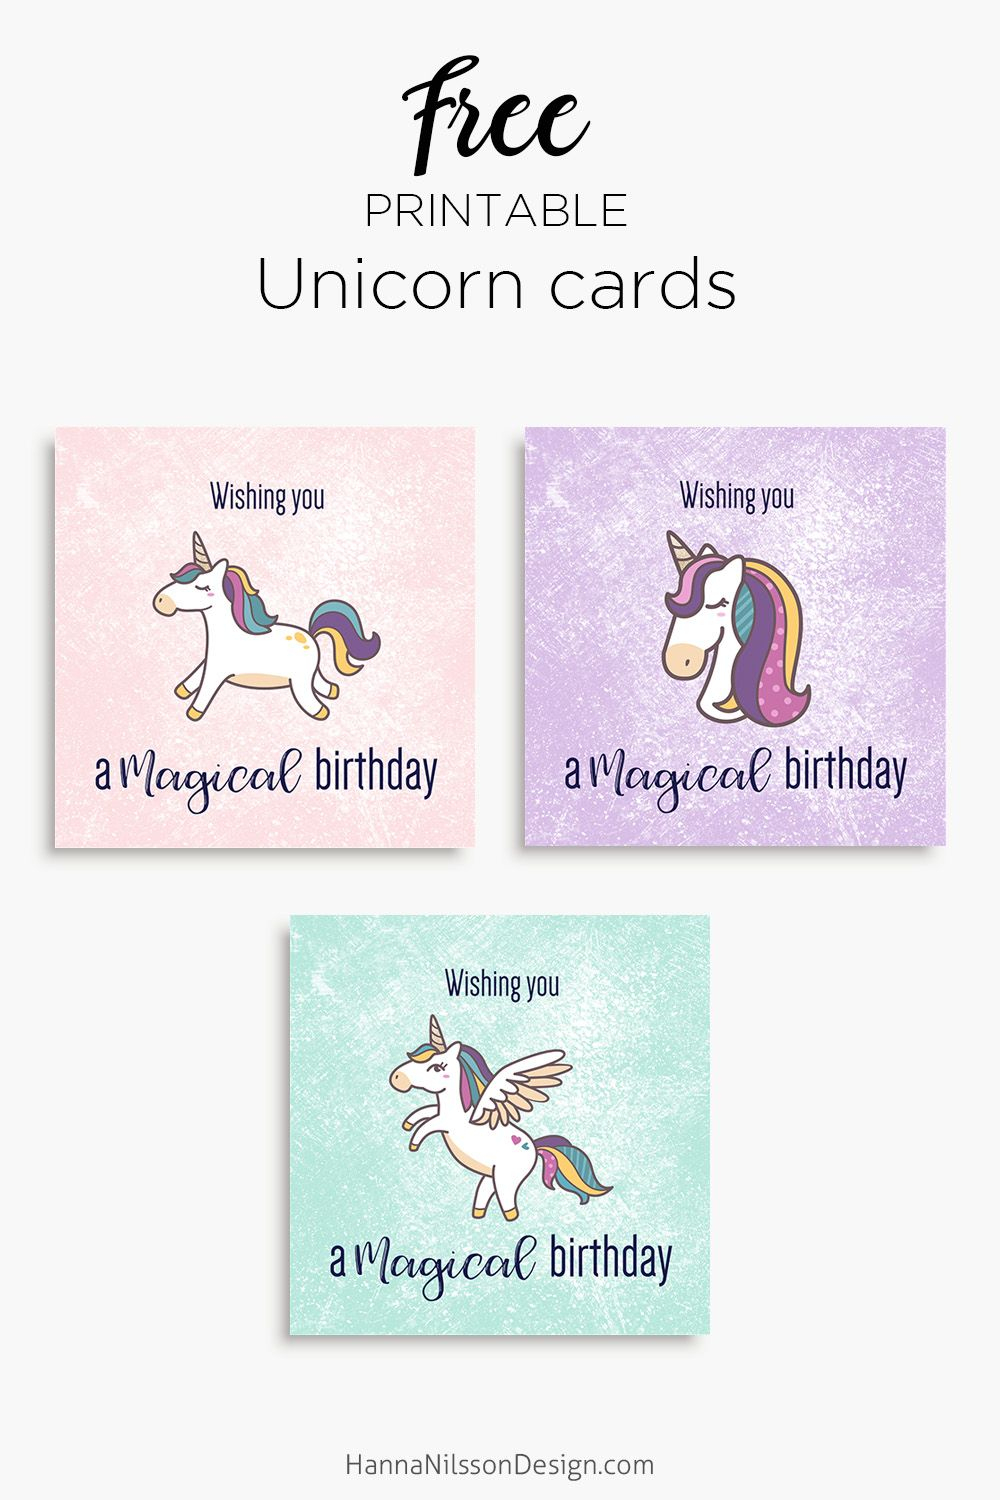 Magical Unicorn Birthday Printable Cards | Tis' Better To Give - Free Printable Easter Cards For Grandchildren